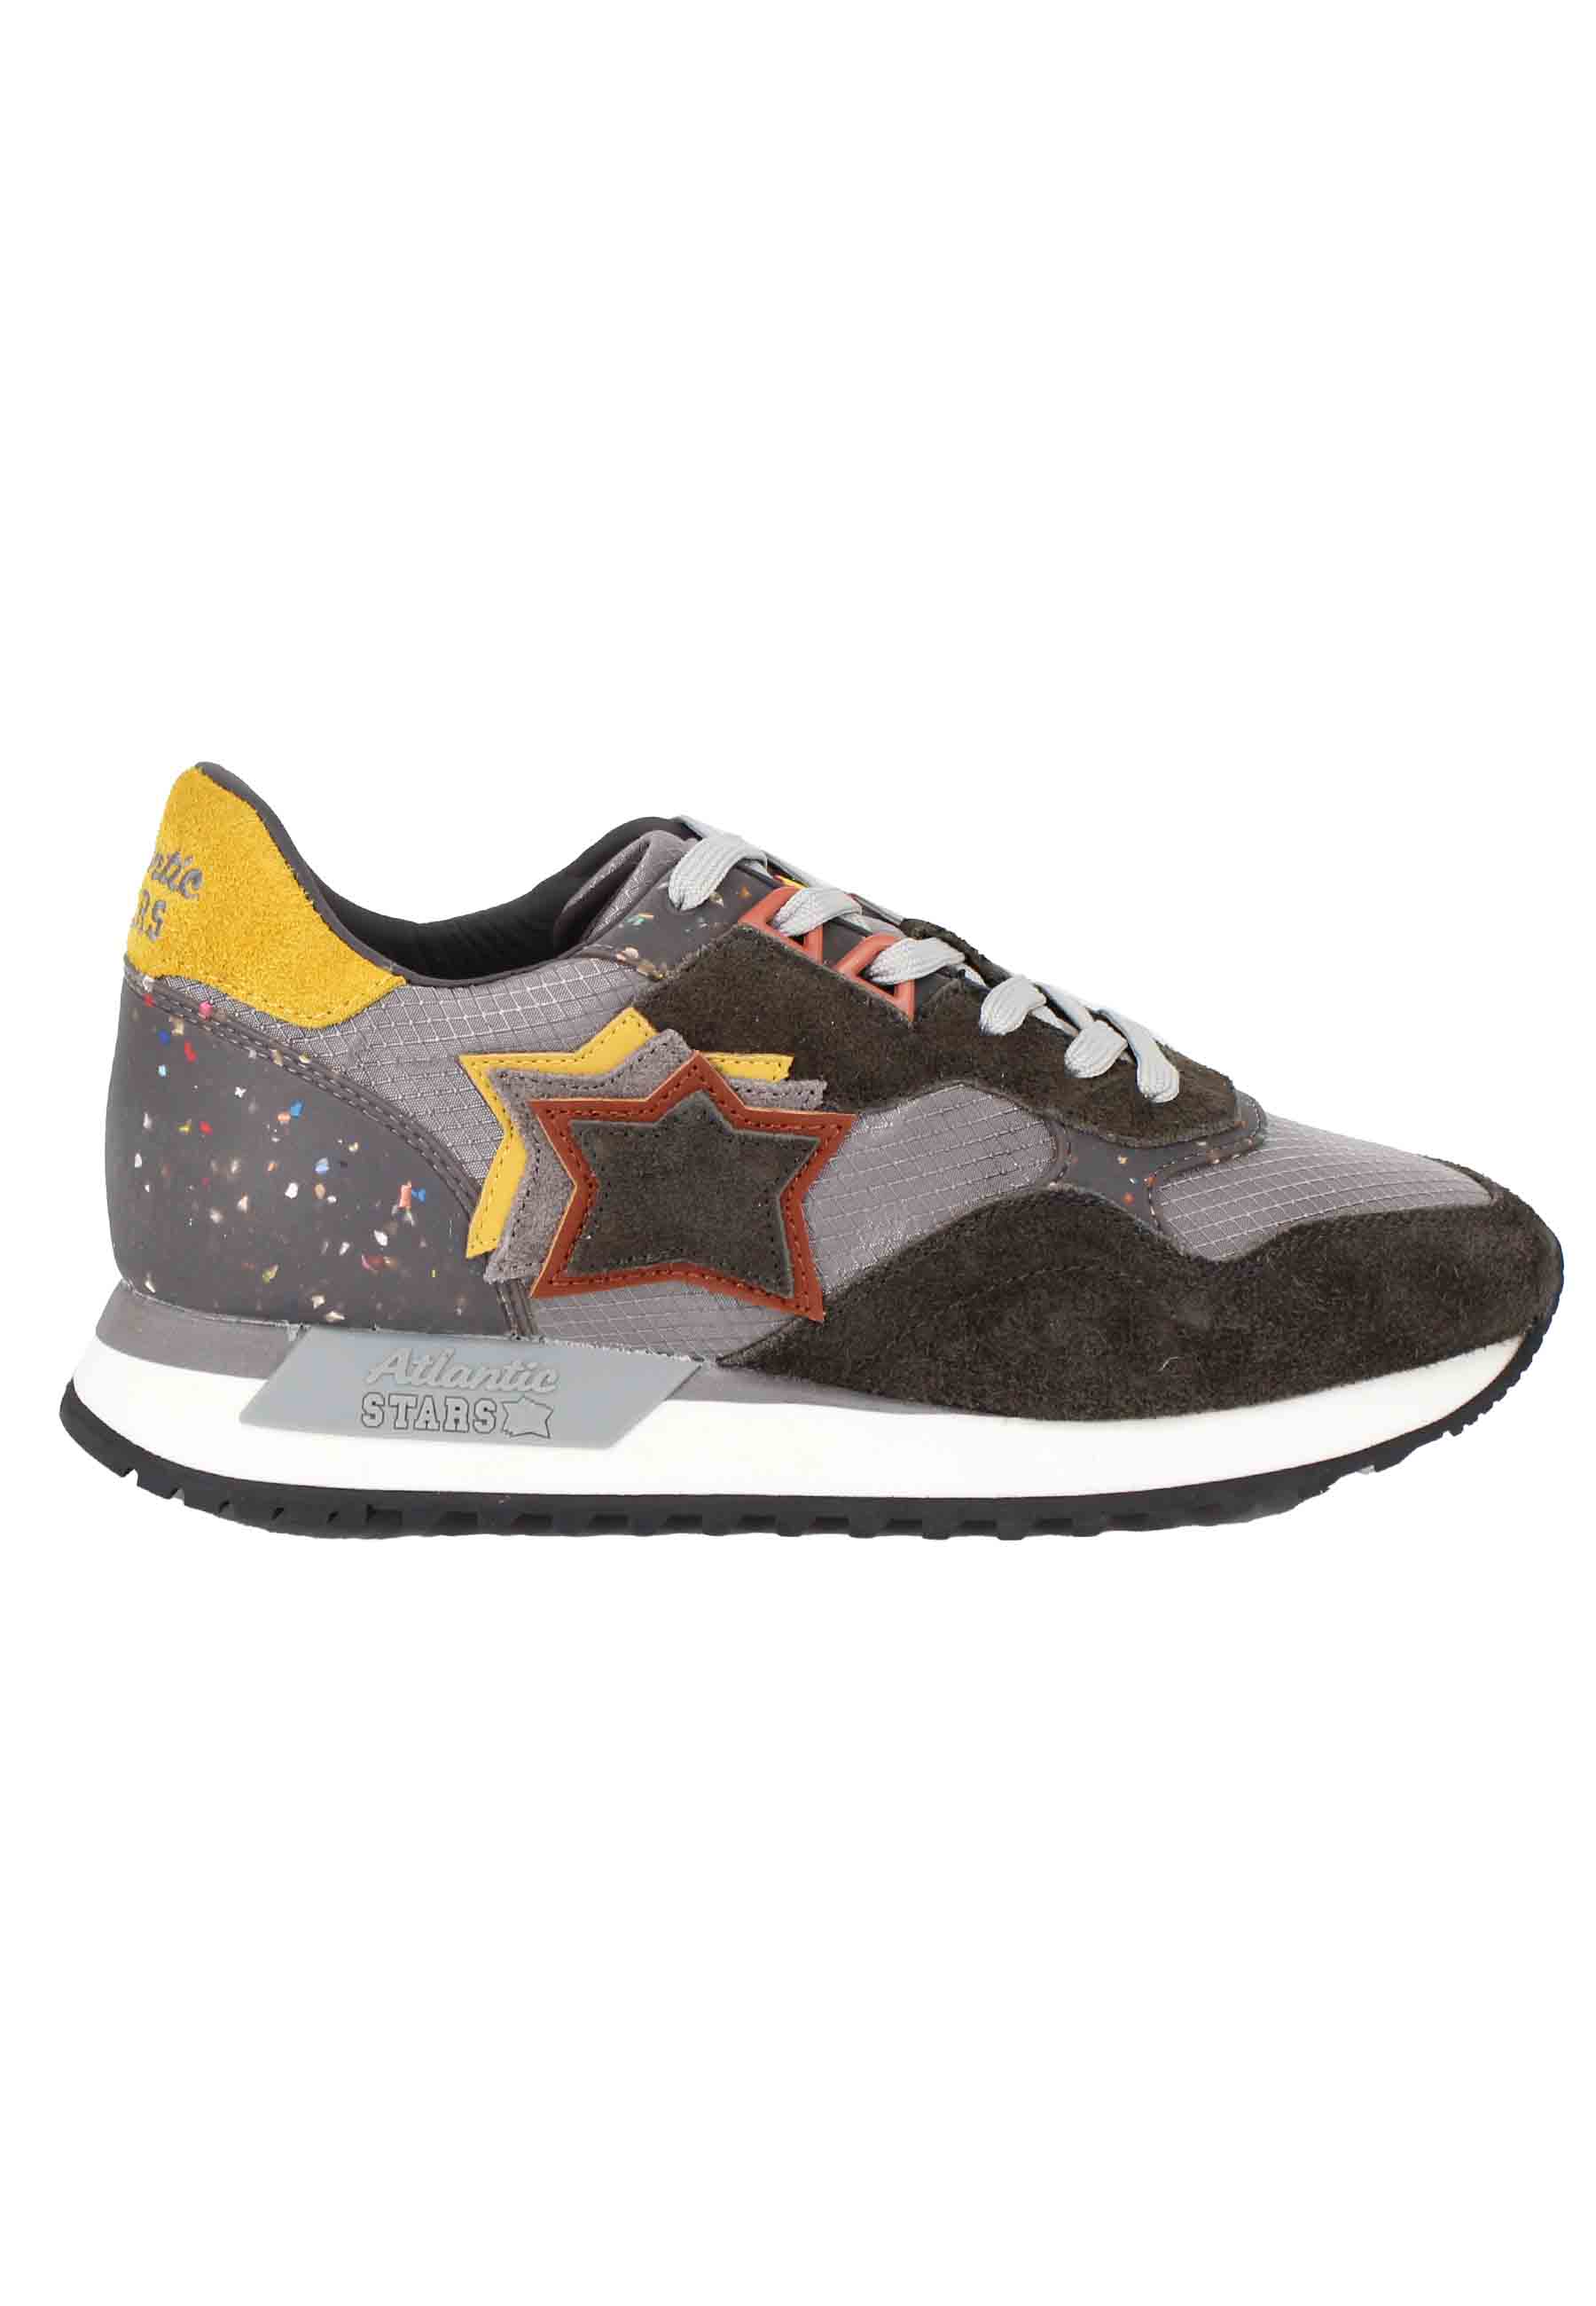 Draco men's sneakers in gray leather and fabric with matching stars